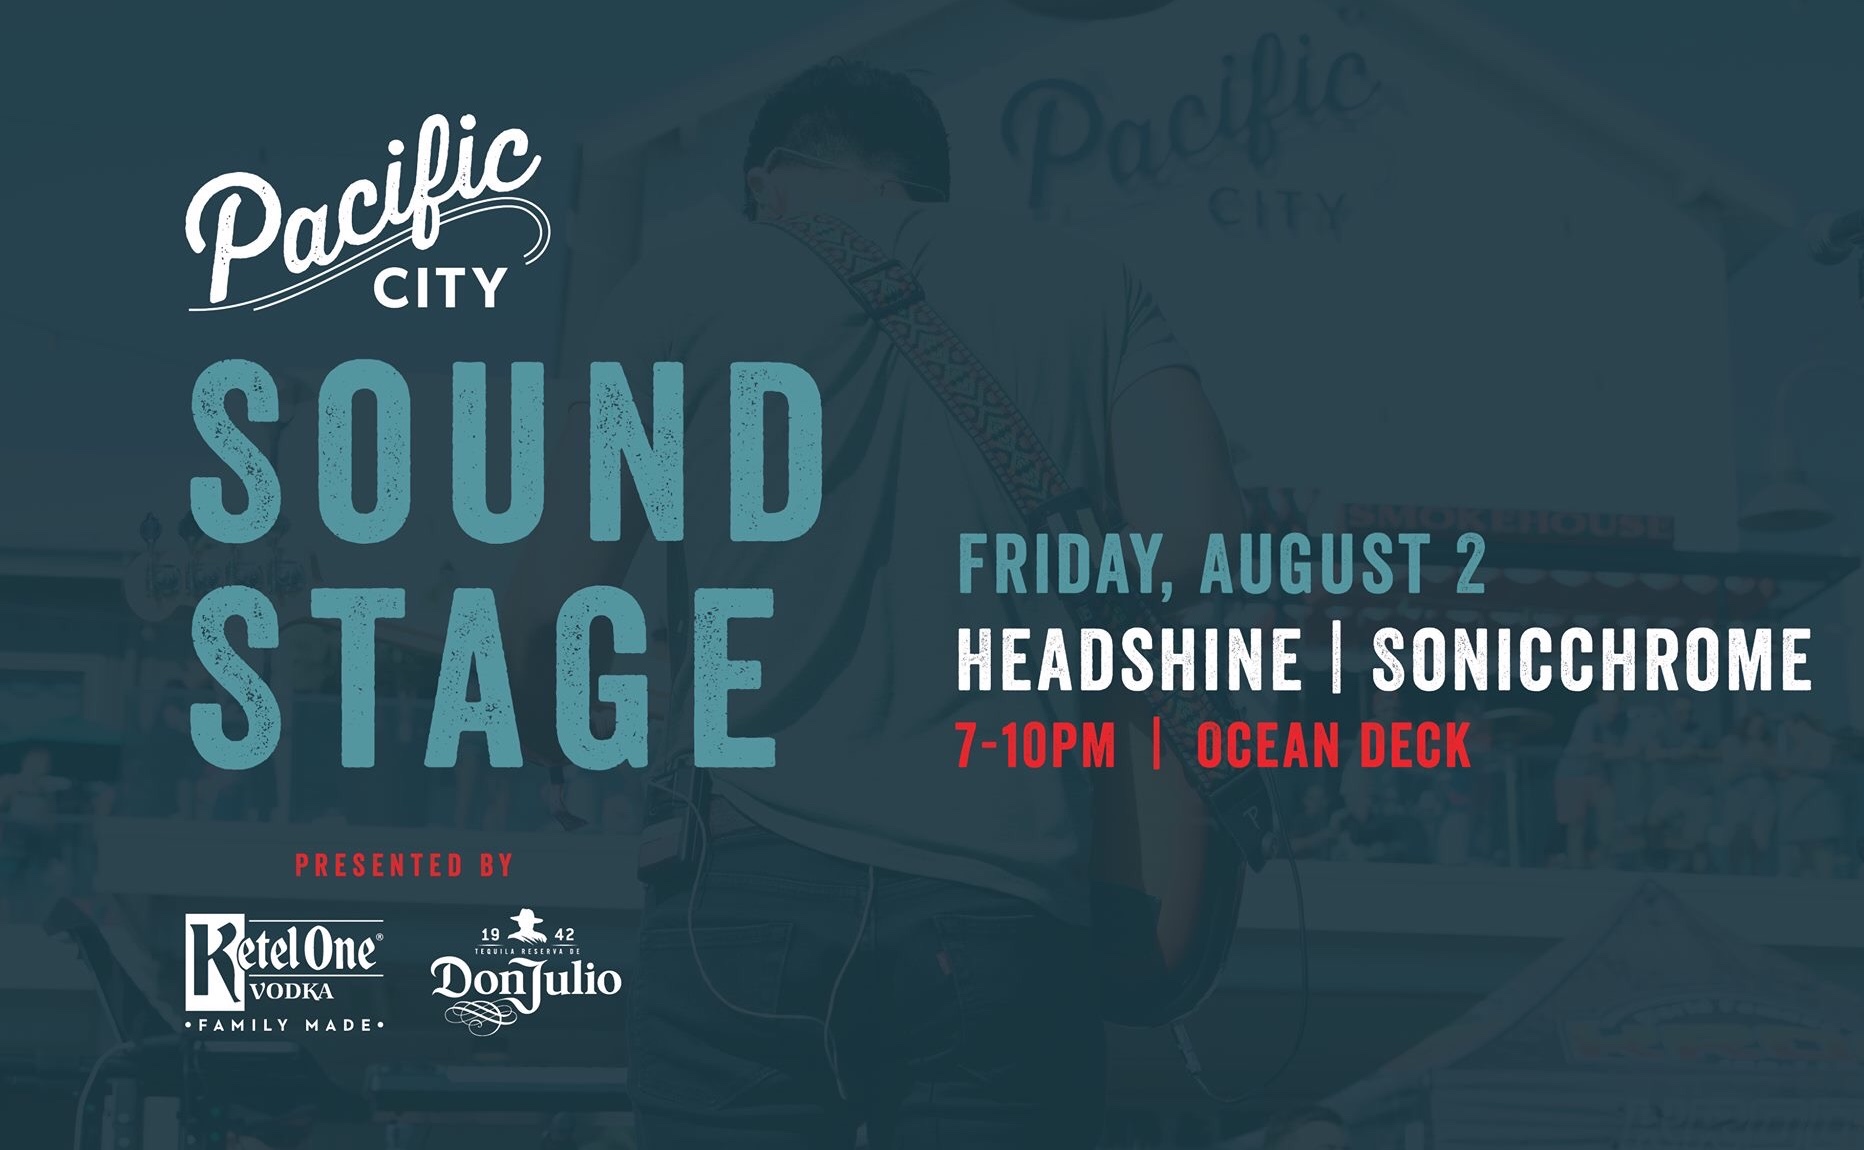 Headshine is headlining Pacific City Sound Stage after Vans US Open of Surfing Contest presented by Ketle One Vodka and Don Julio Tequila